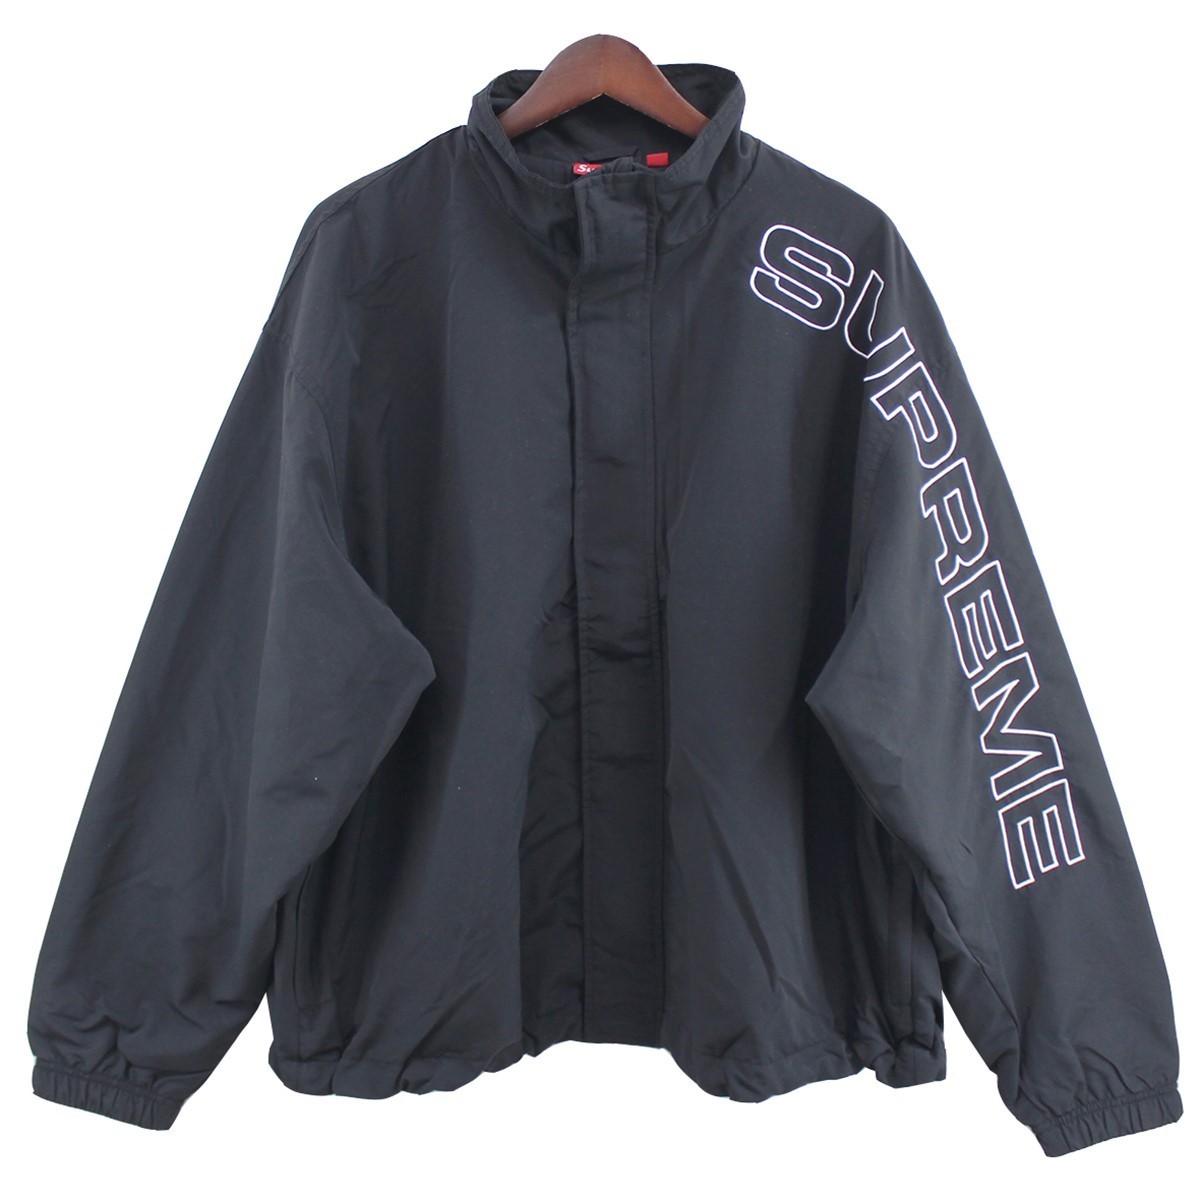 SUPREME　 23AW Spellout Embroidered Track Jacket ロゴトラックジャケット 商品番号：8056000169119